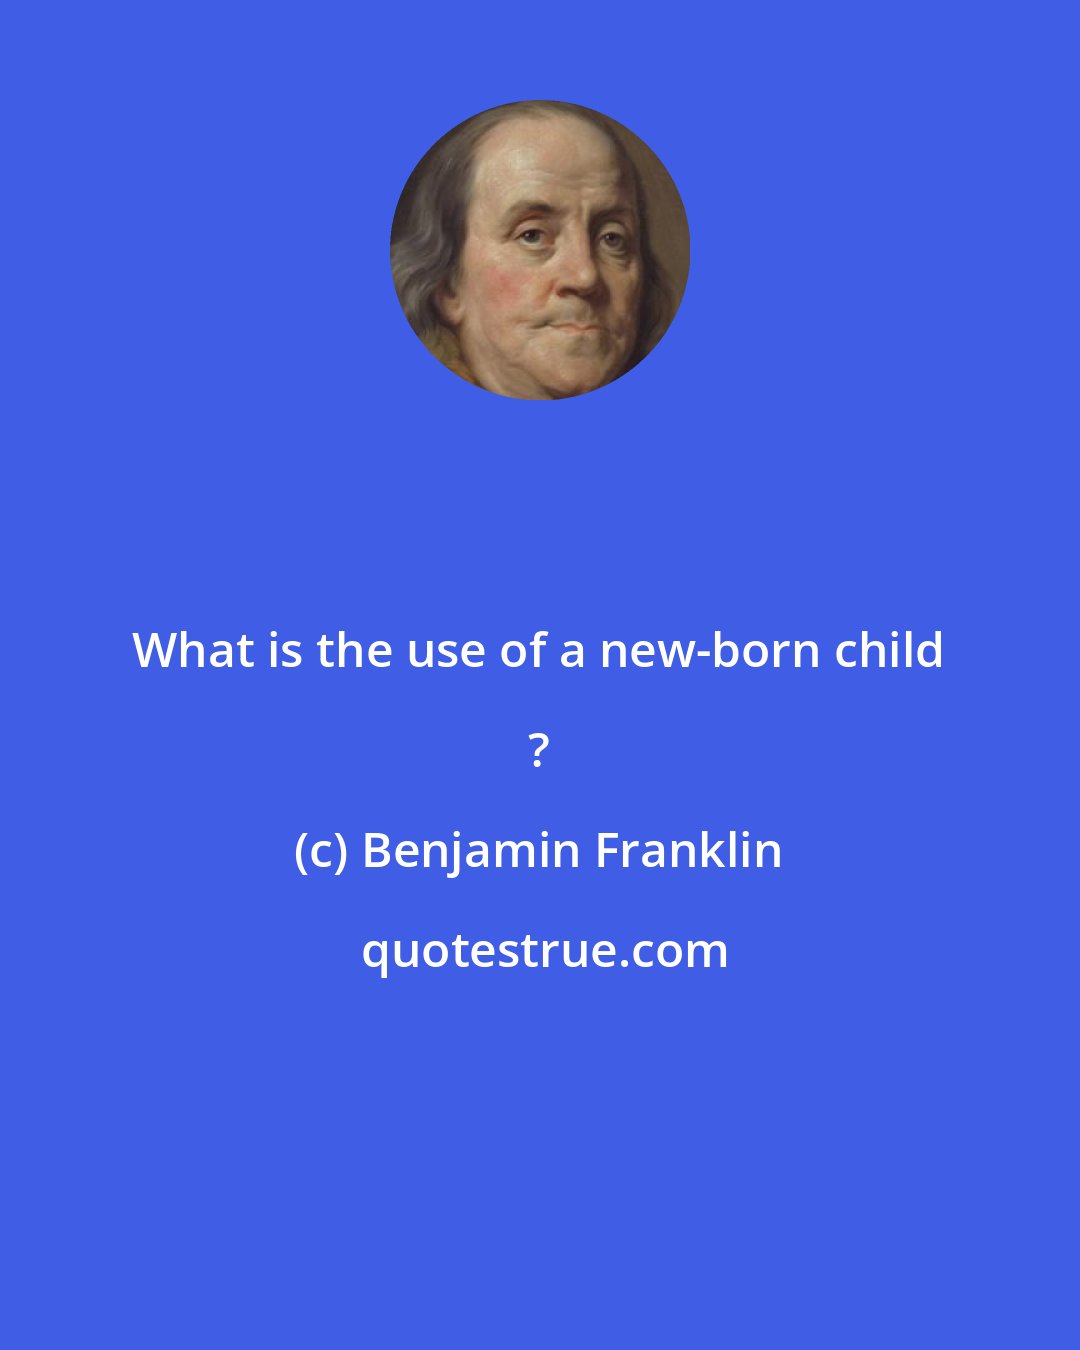 Benjamin Franklin: What is the use of a new-born child ?